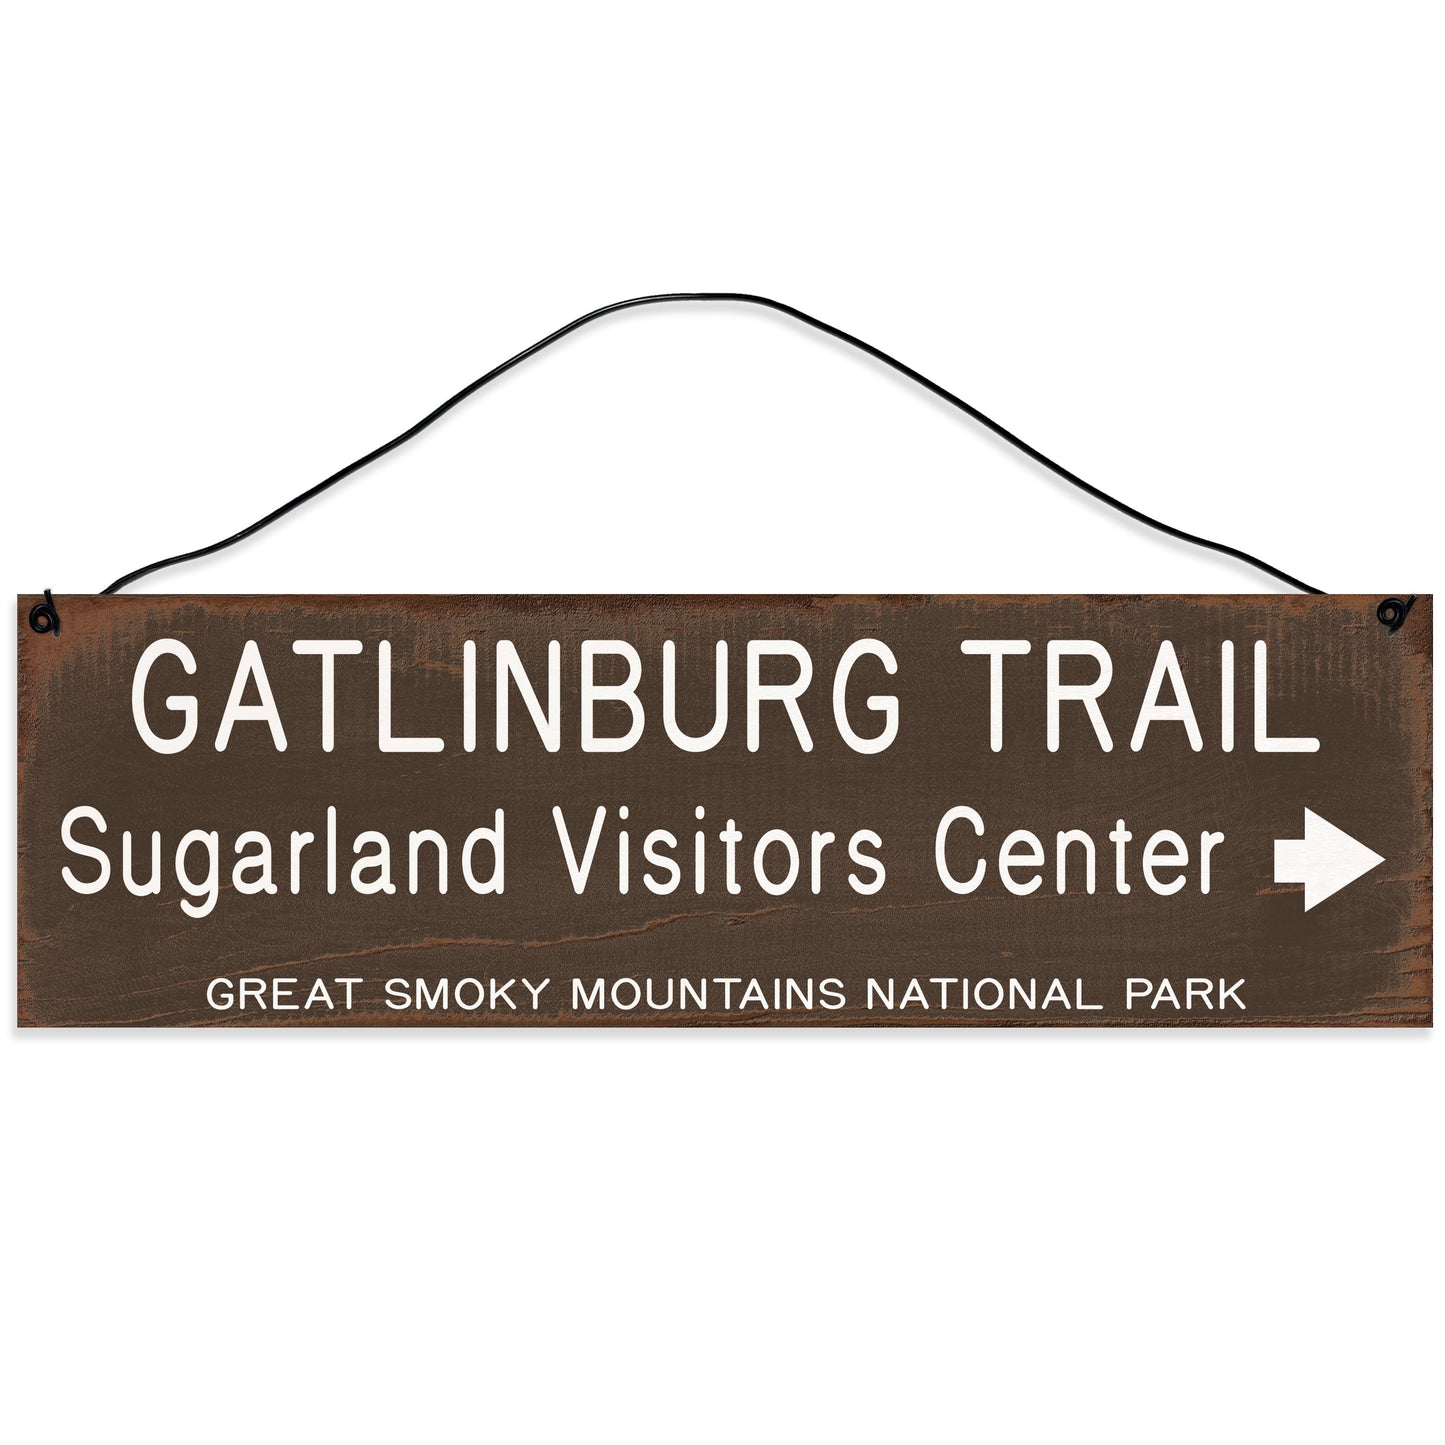 Sawyer's Mill - Gatlinburg Trail Marker Wood Sign for Home or Office. Measures 3x10 inches.